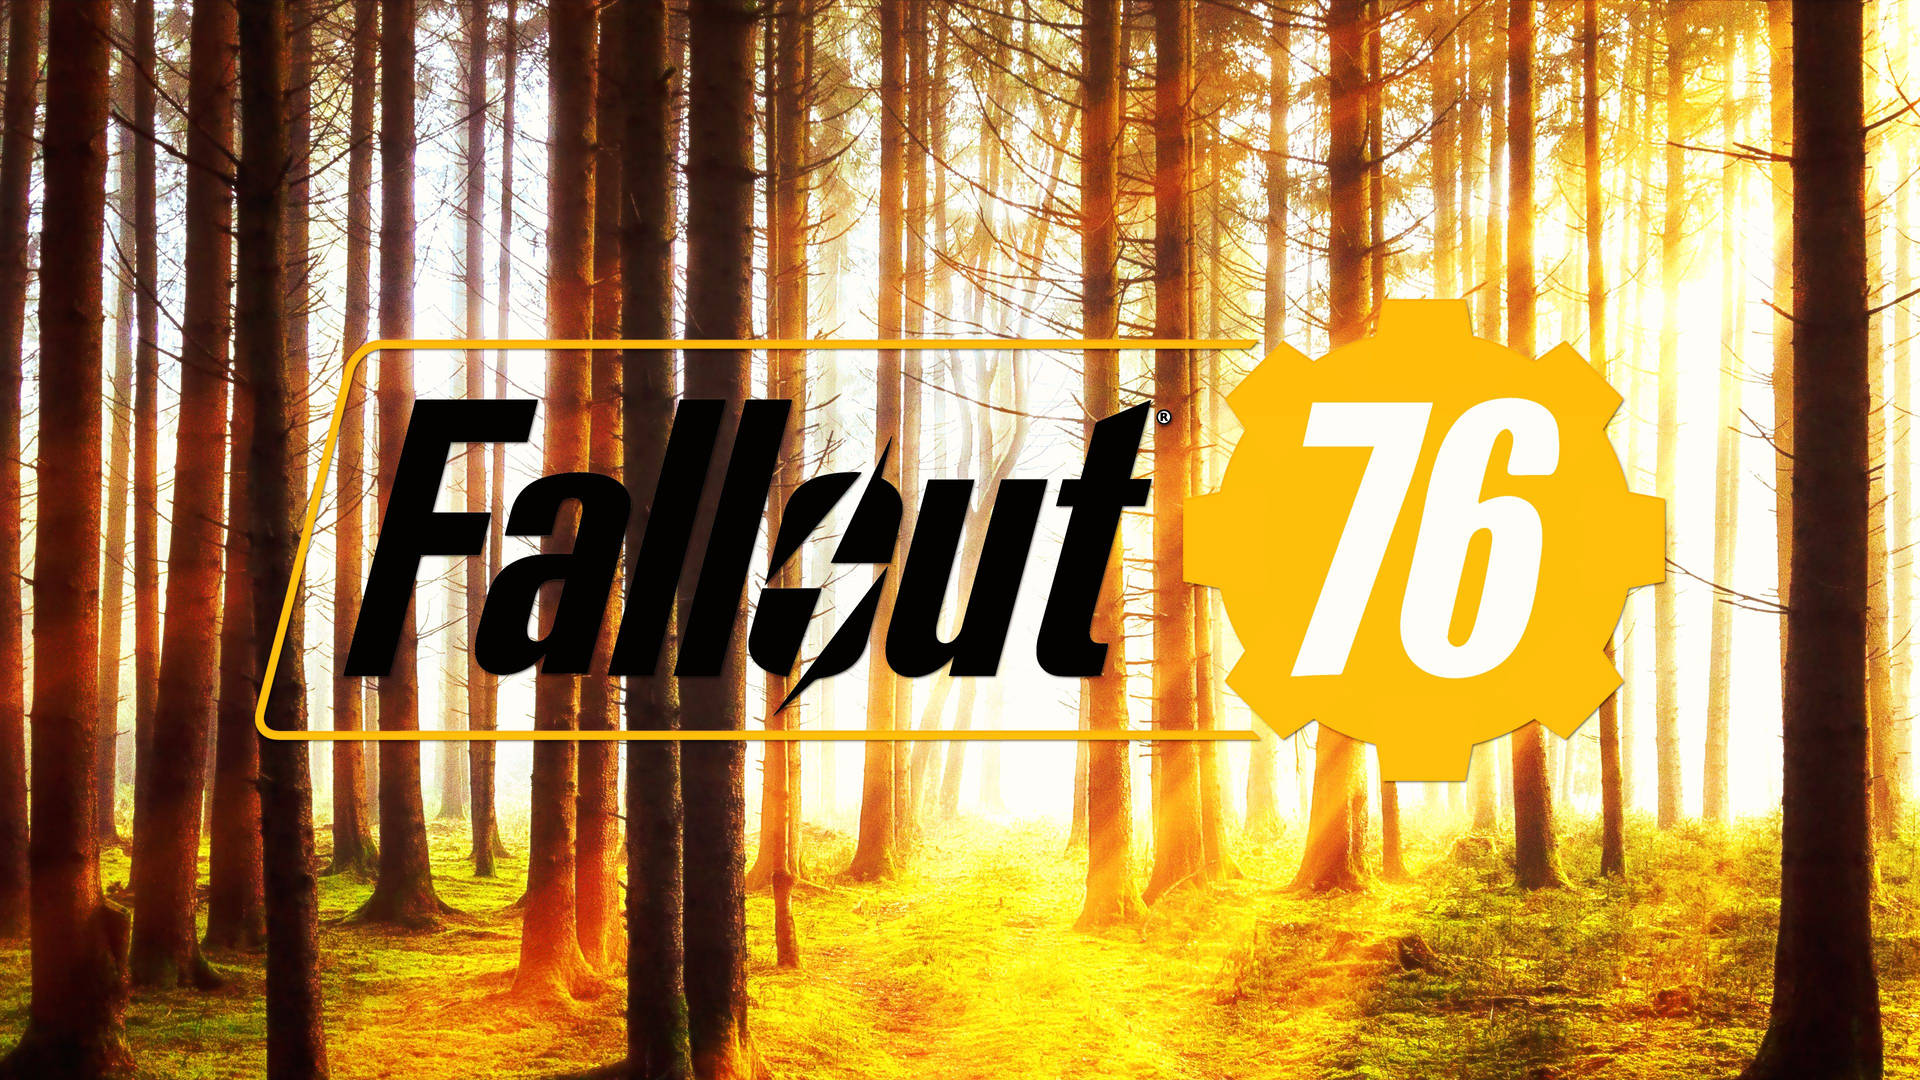 “Chart your own path in the world of Fallout 76” Wallpaper